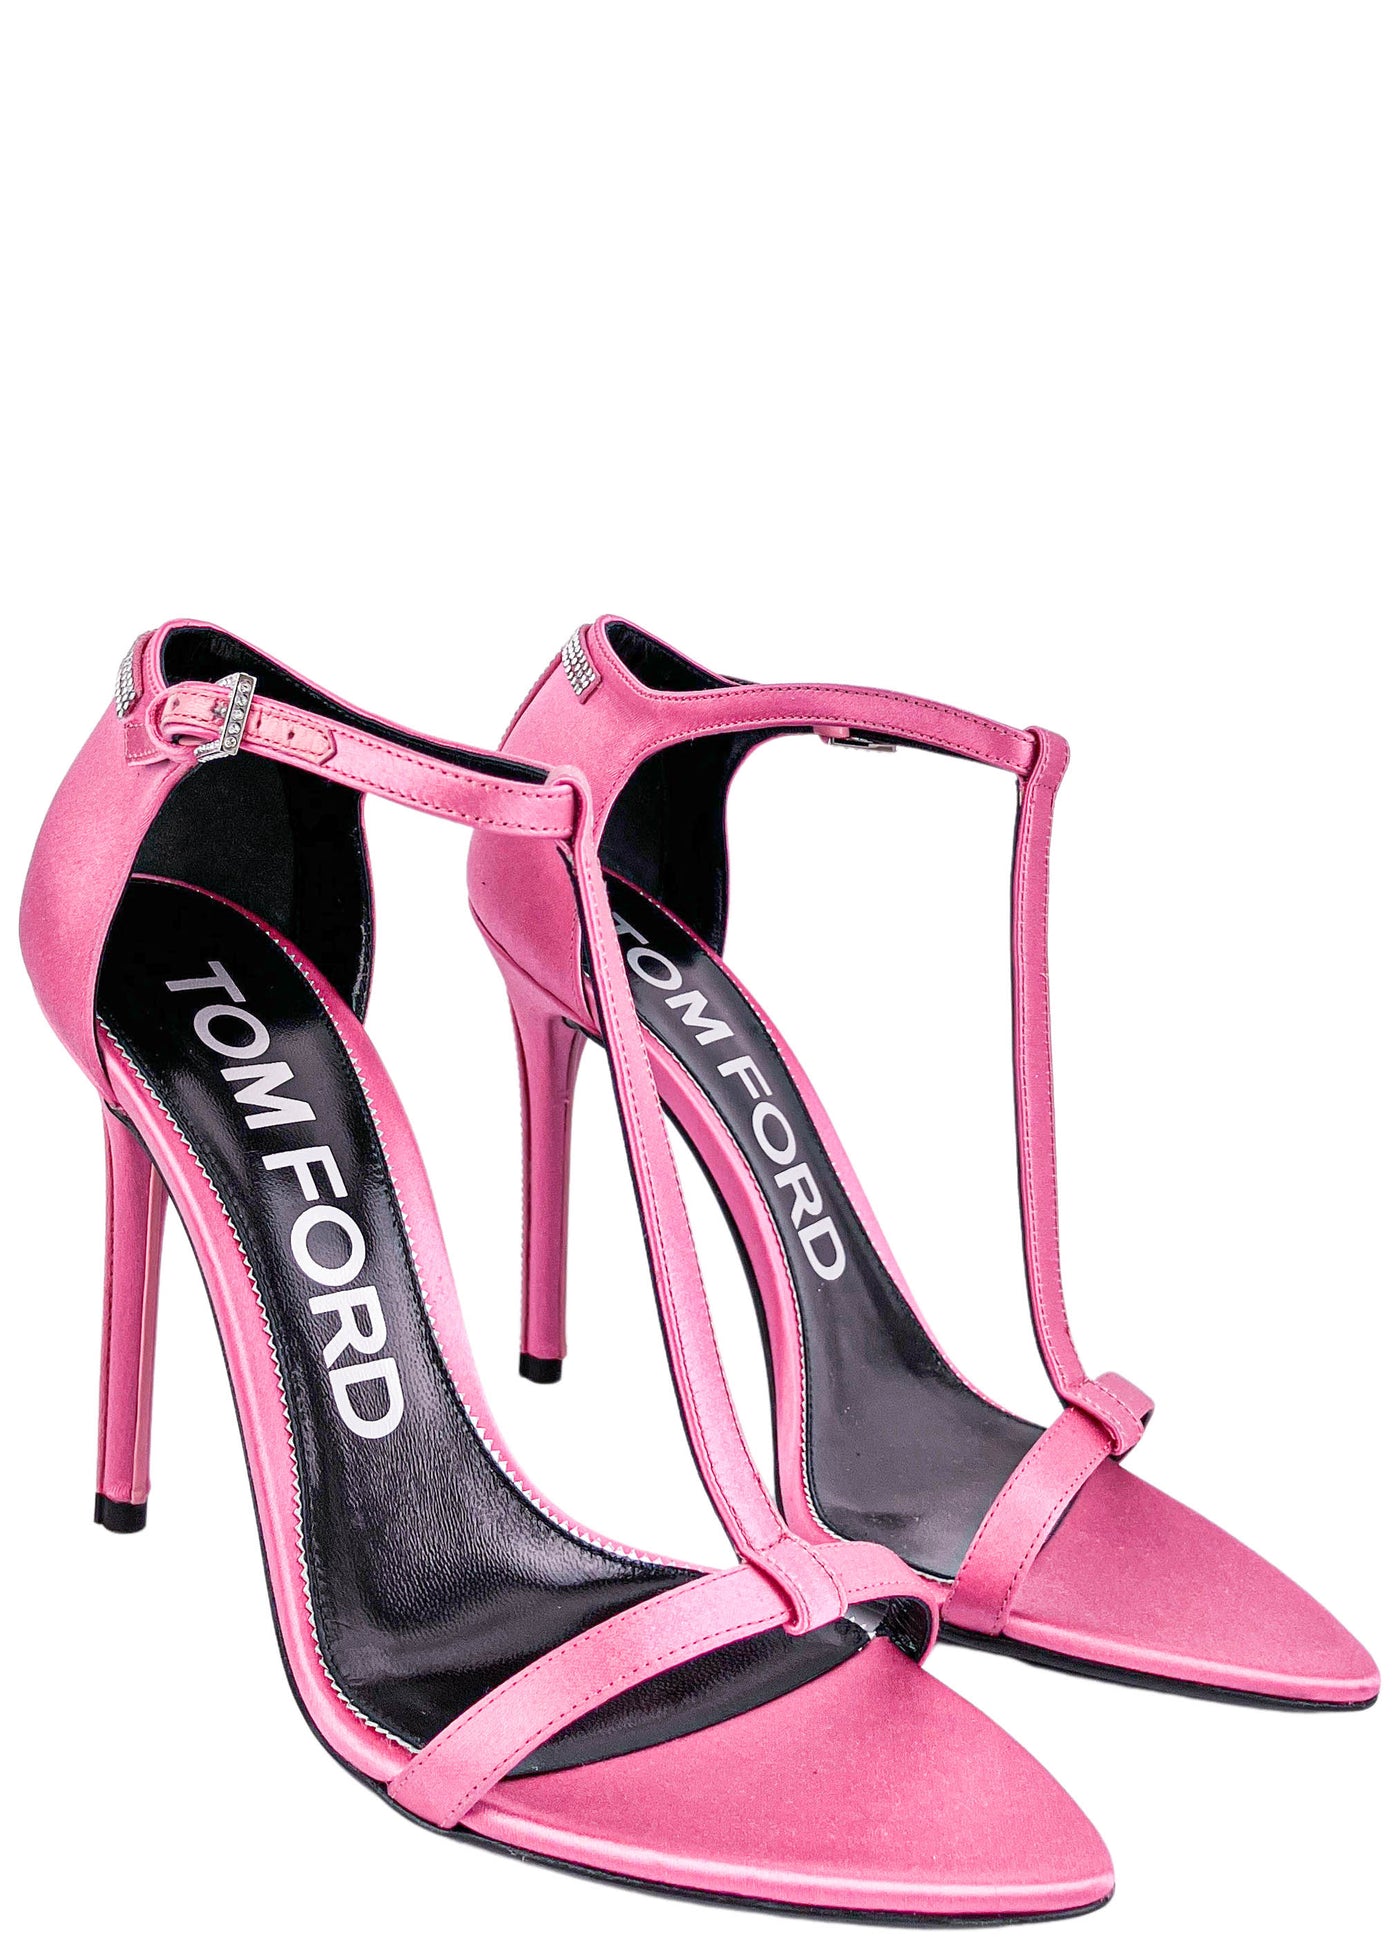 Tom Ford Iconic T Crystal Satin Sandals in Pink - Discounts on Tom Ford at UAL